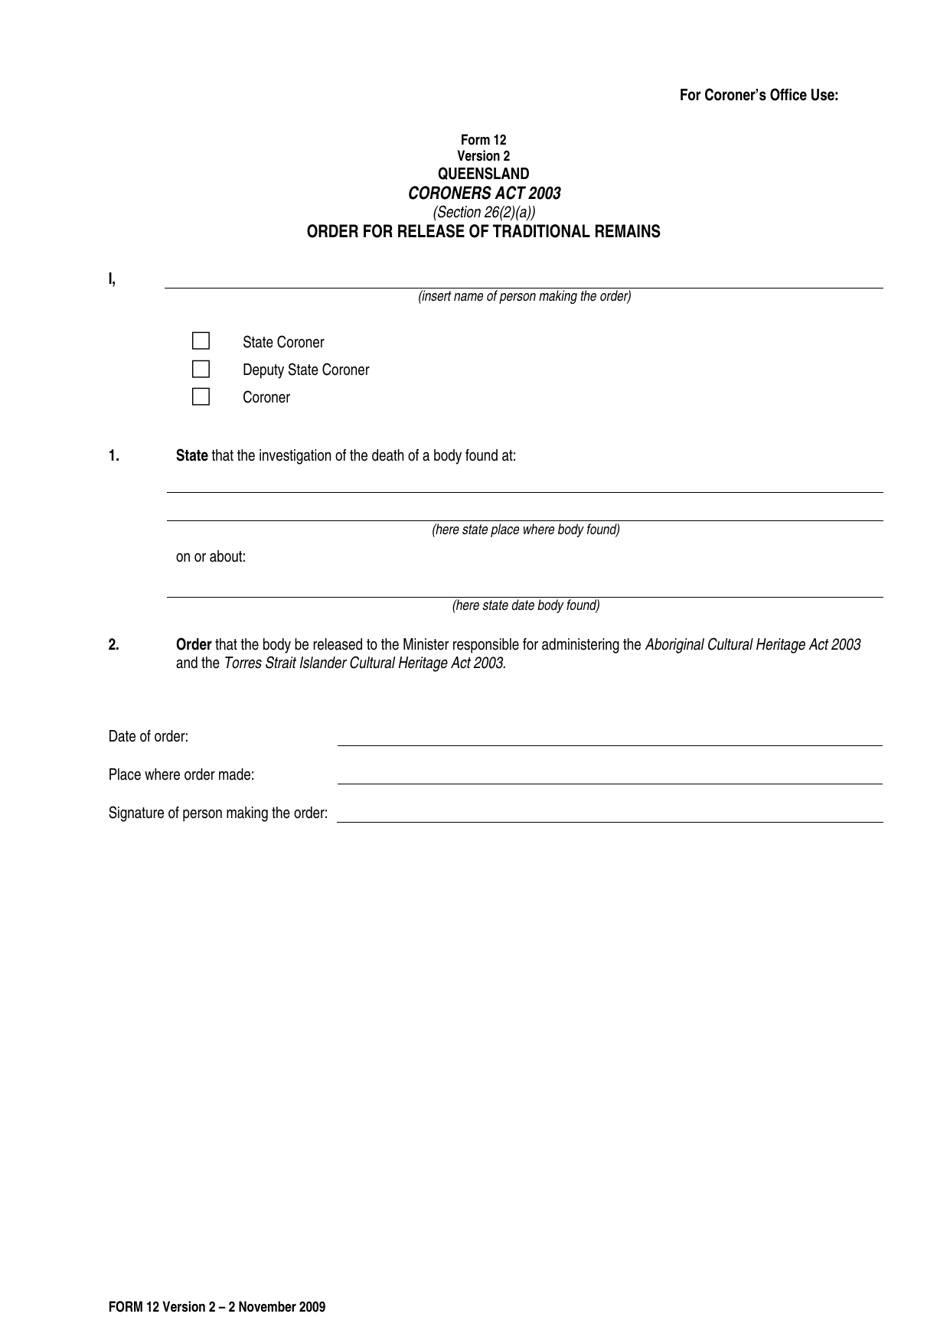 Form 12 Order for Release of Traditional Remains - Queensland, Australia, Page 1